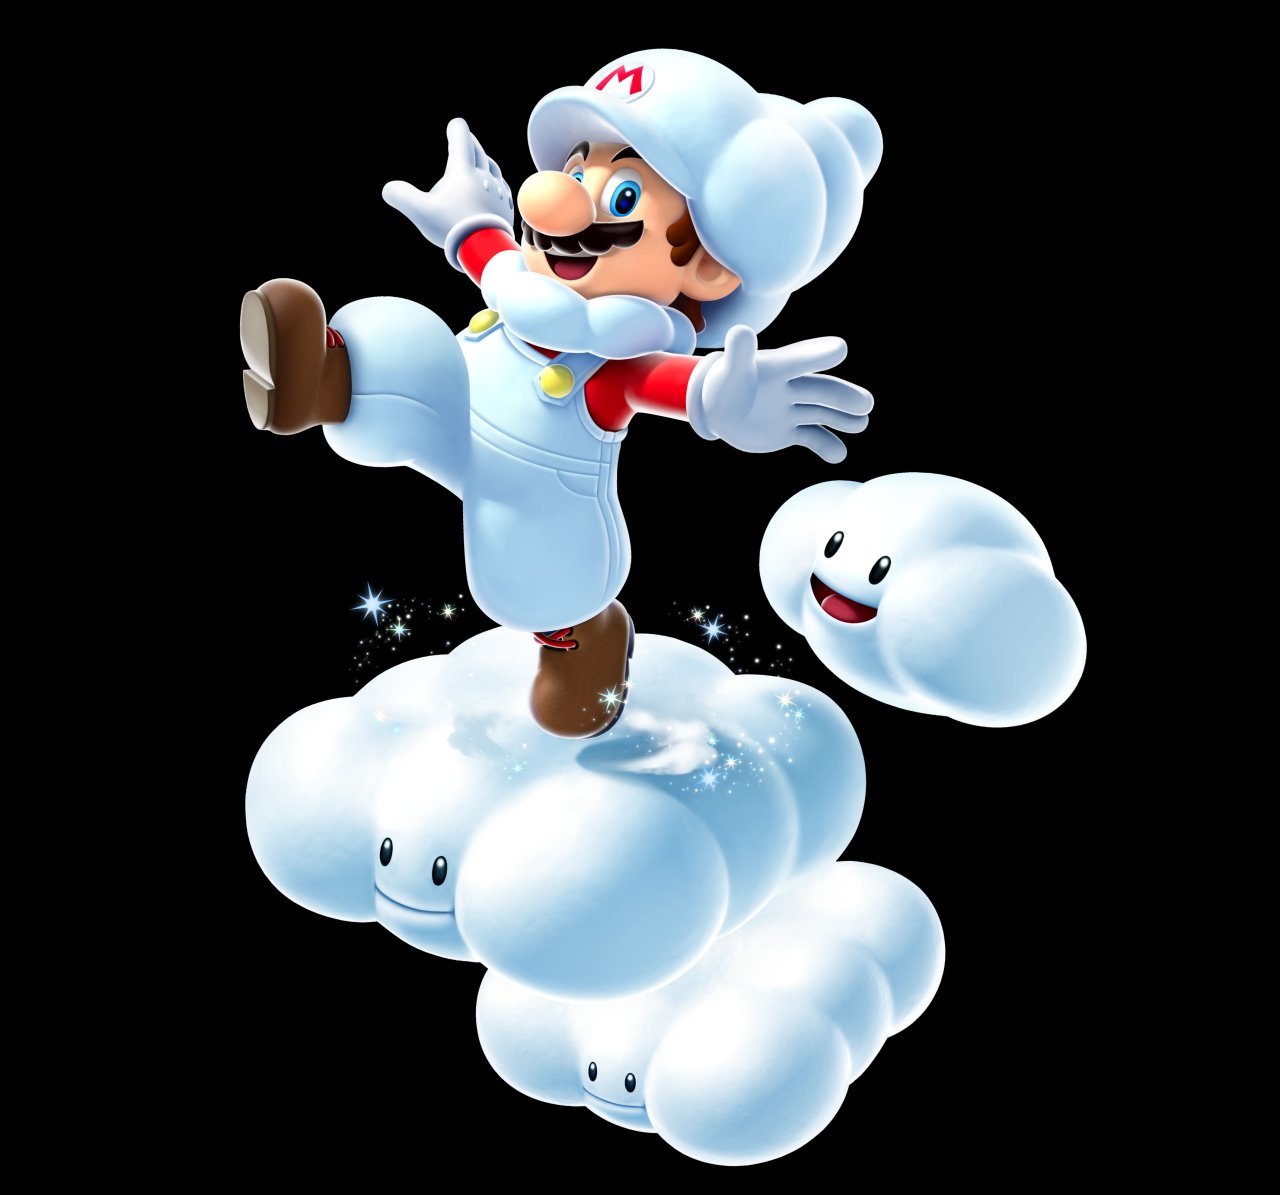 Gallery Mario A History Of Power Ups Fashion And Wardrobe Missteps